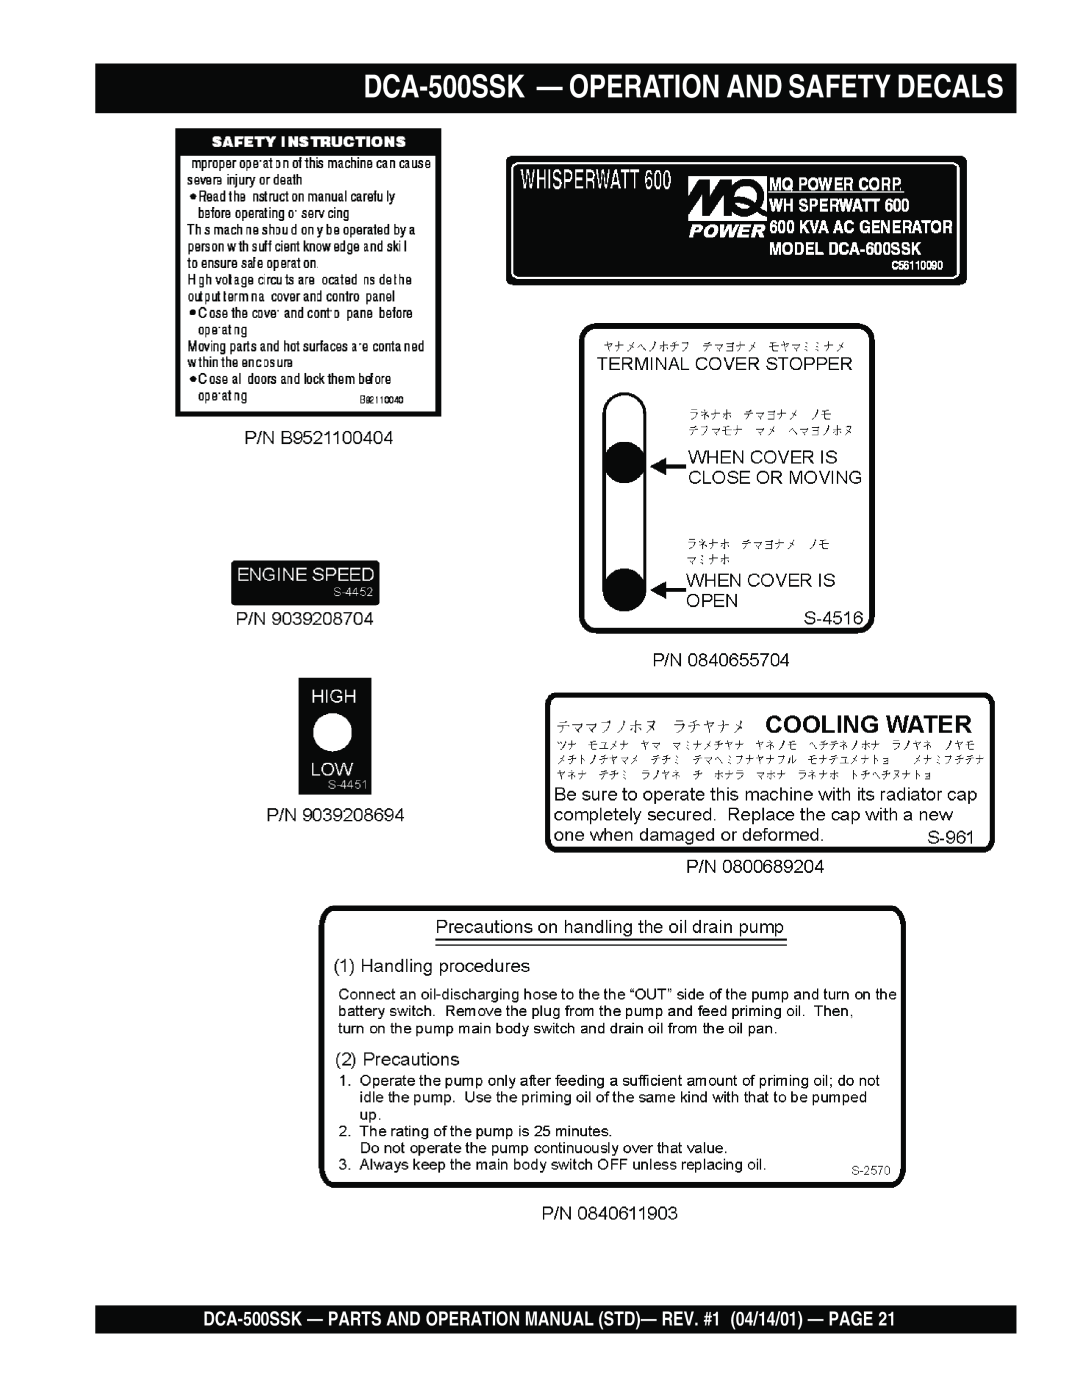 Multiquip operation manual DCA-500SSK - OPERATION AND SAFETY DECALS 